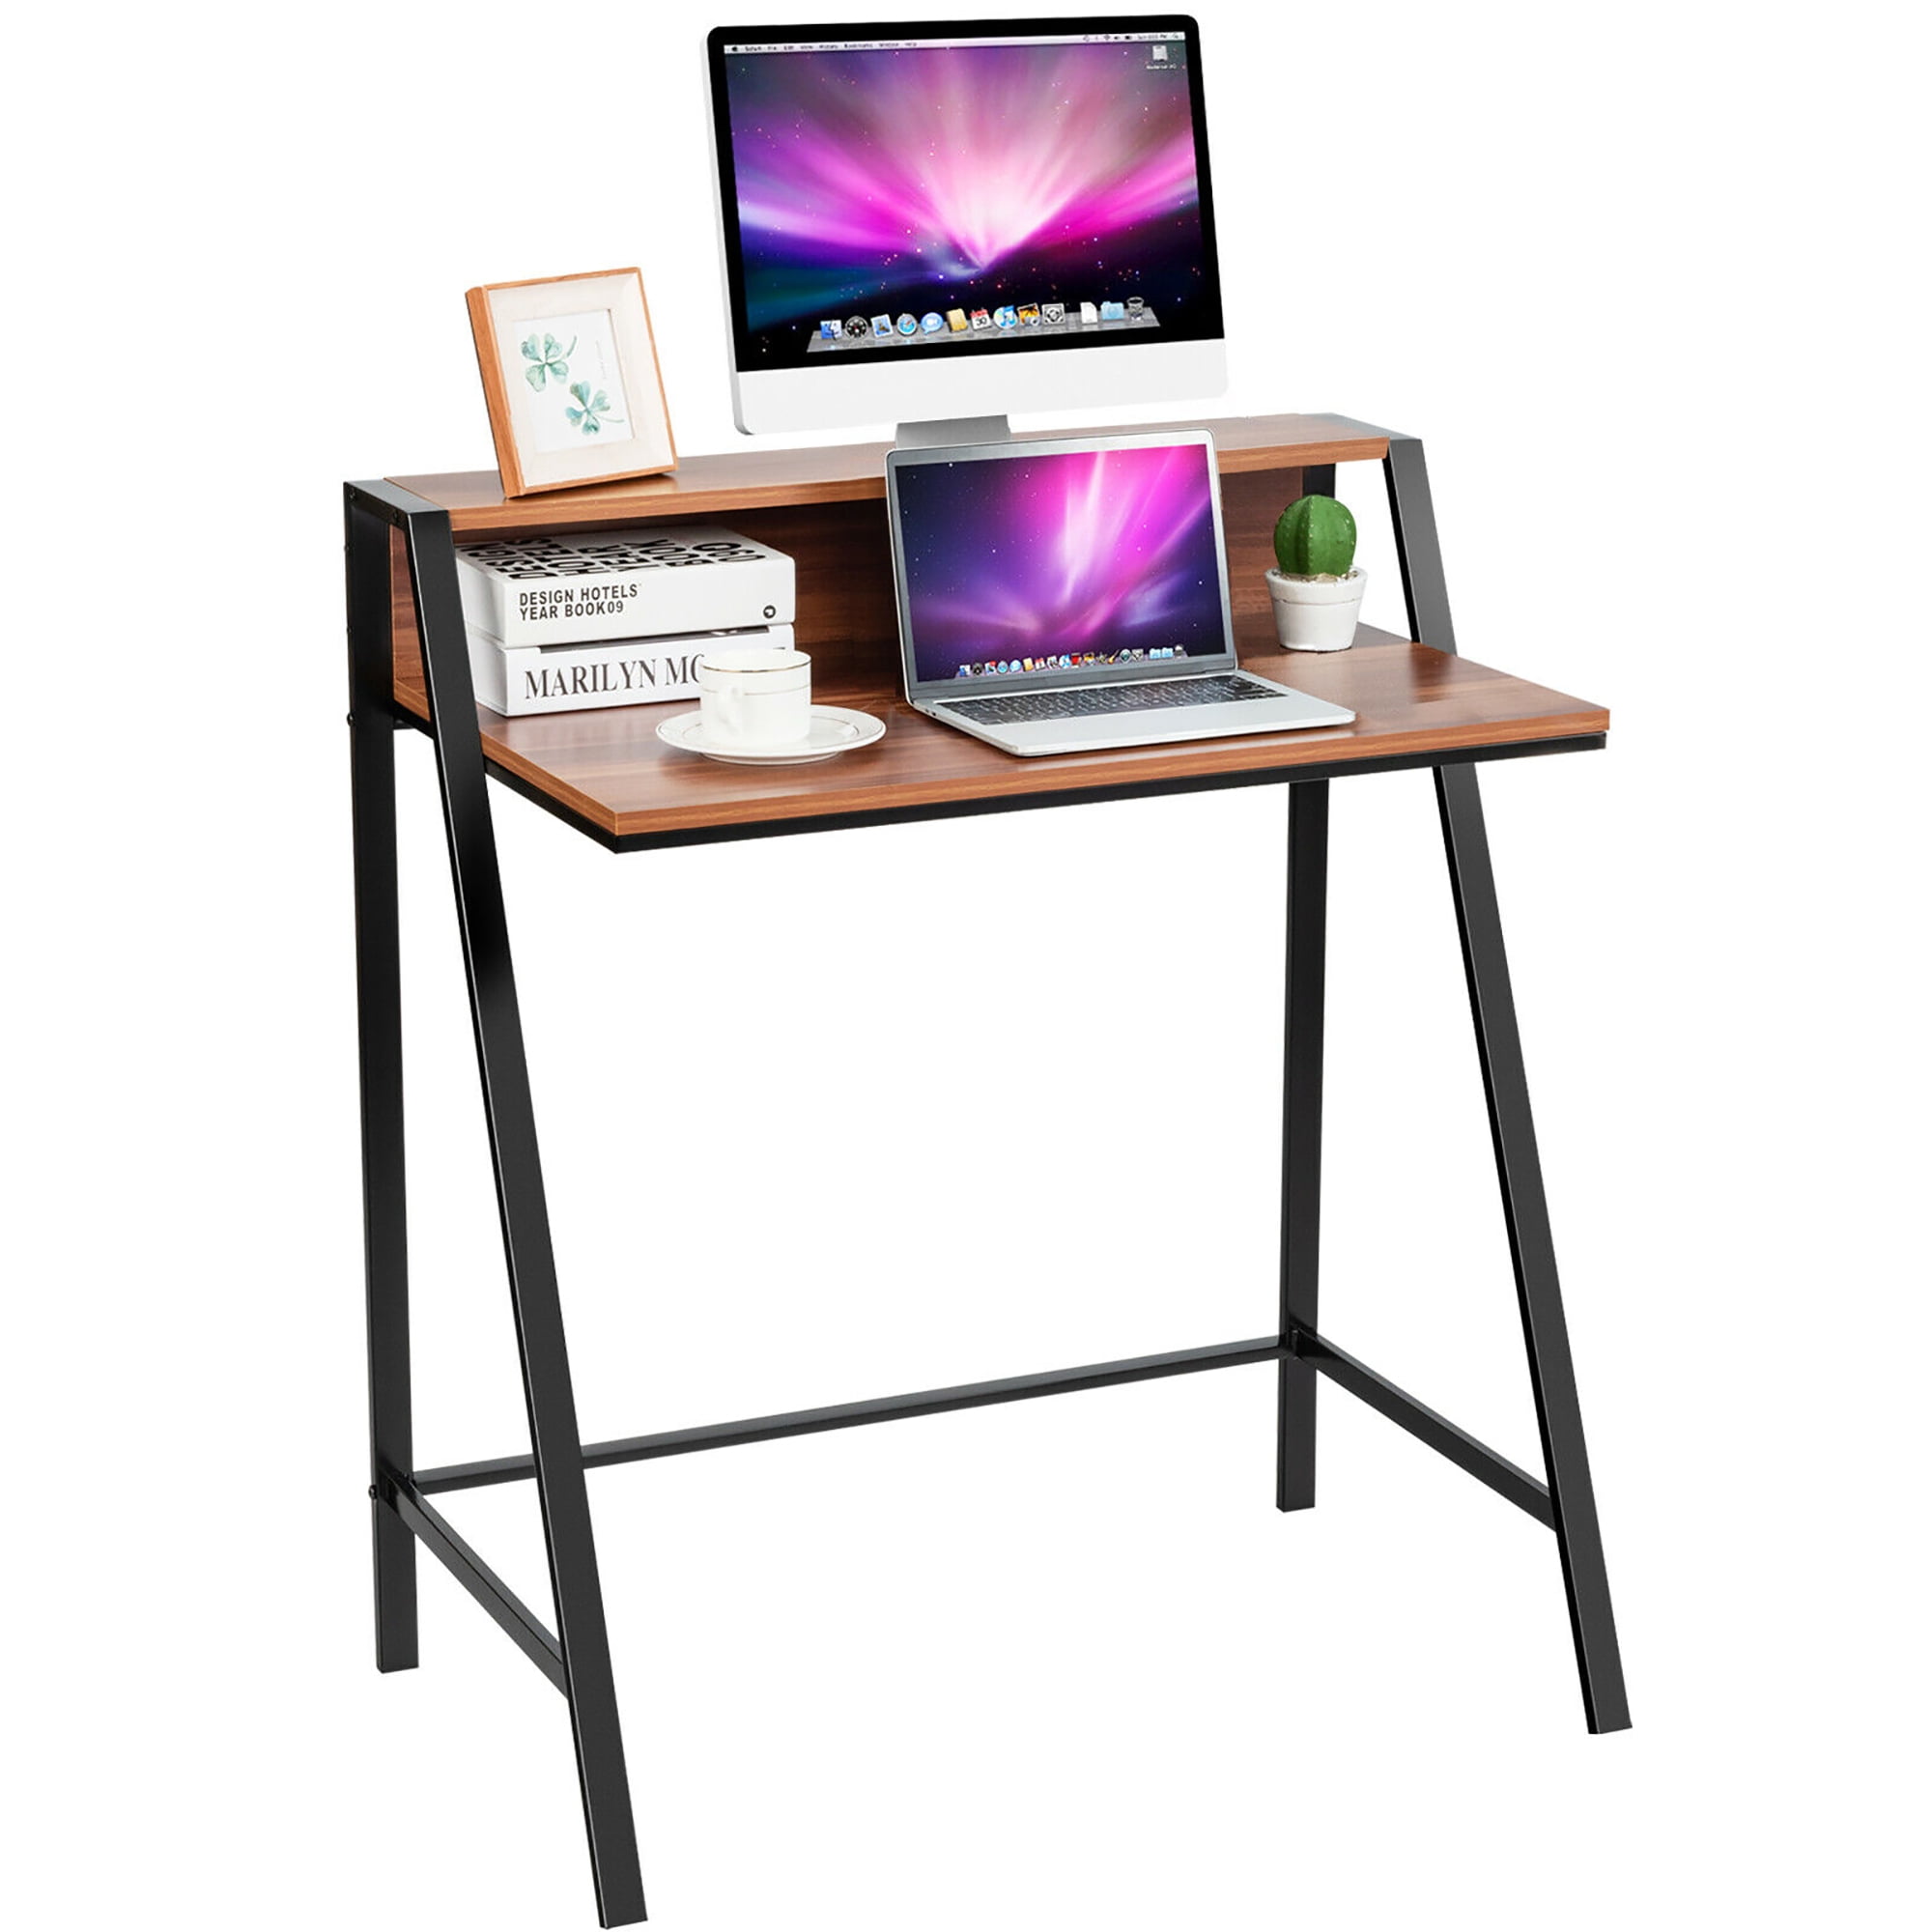 Computer Desk Study Office Storage PC Laptop Table Student Home Writing Table US 